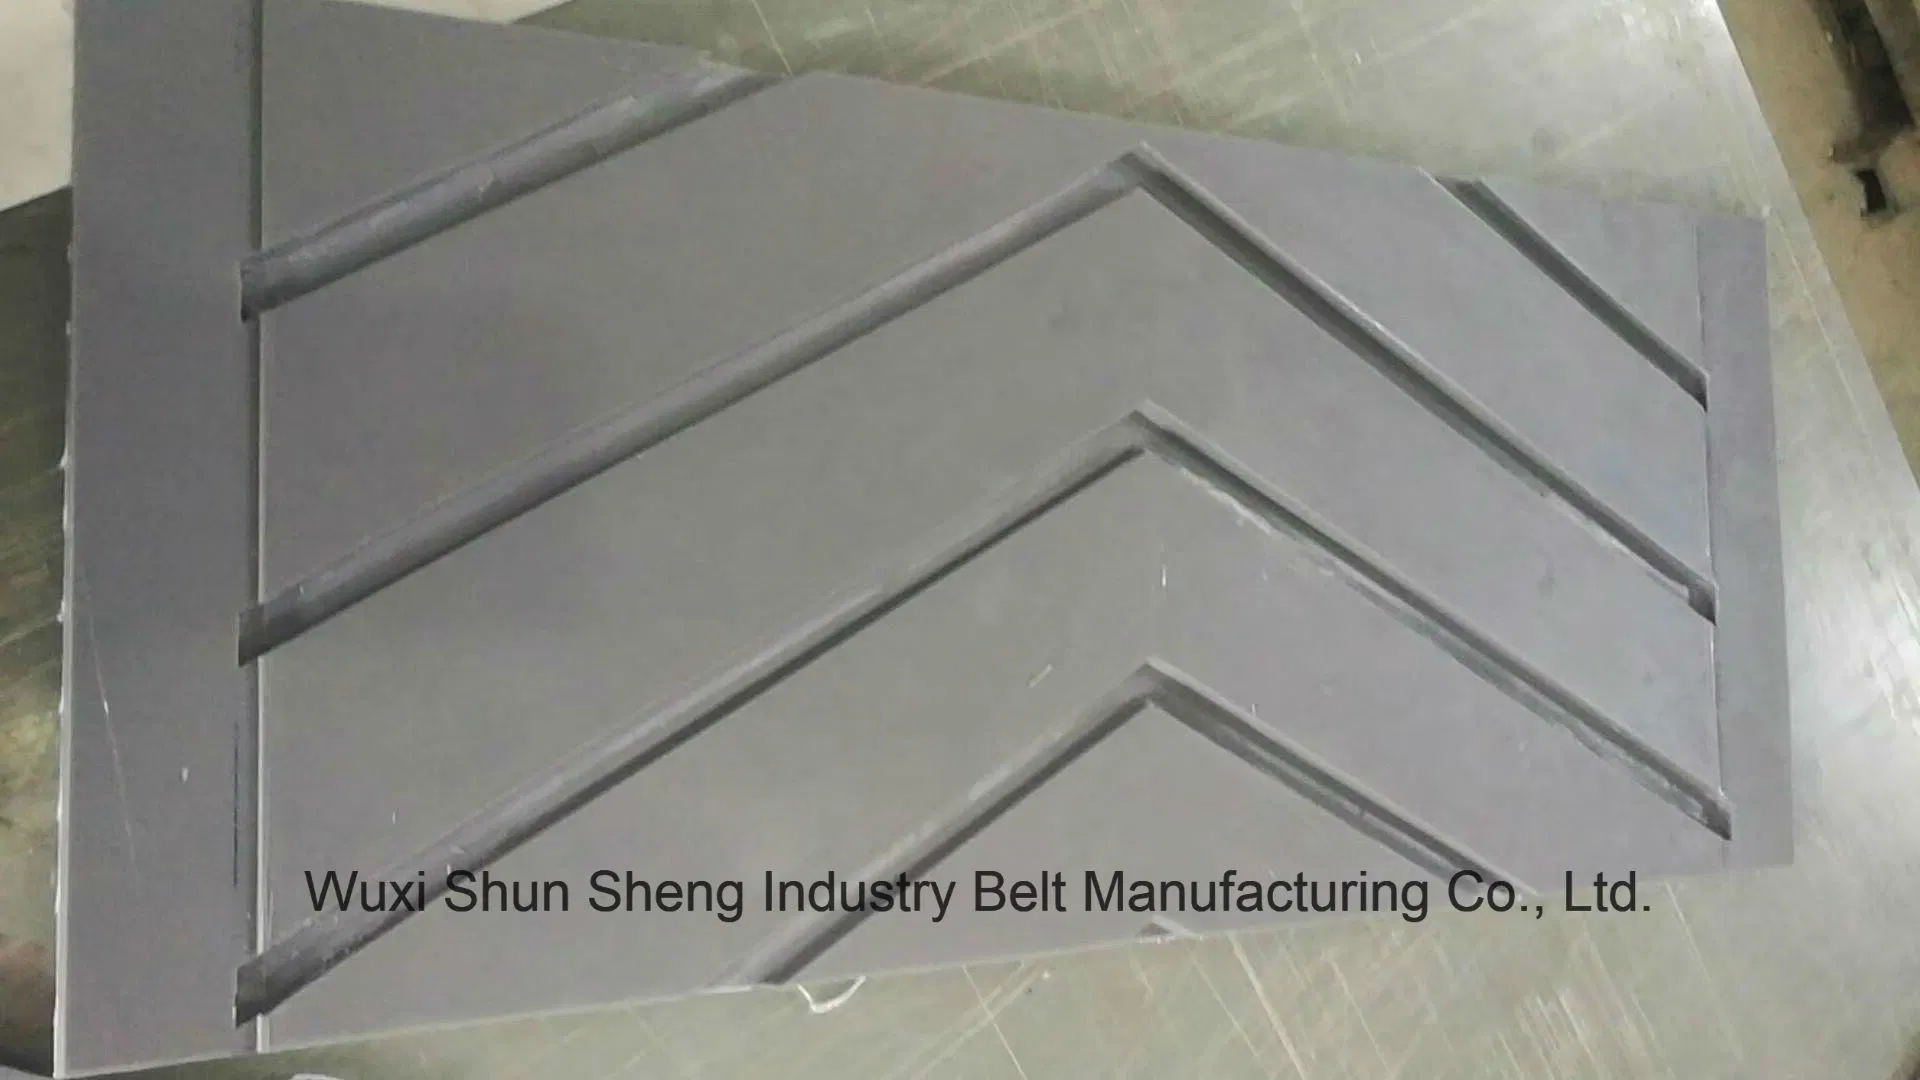 New Customized Silicon Mould and Accessories for Conveyor Belt